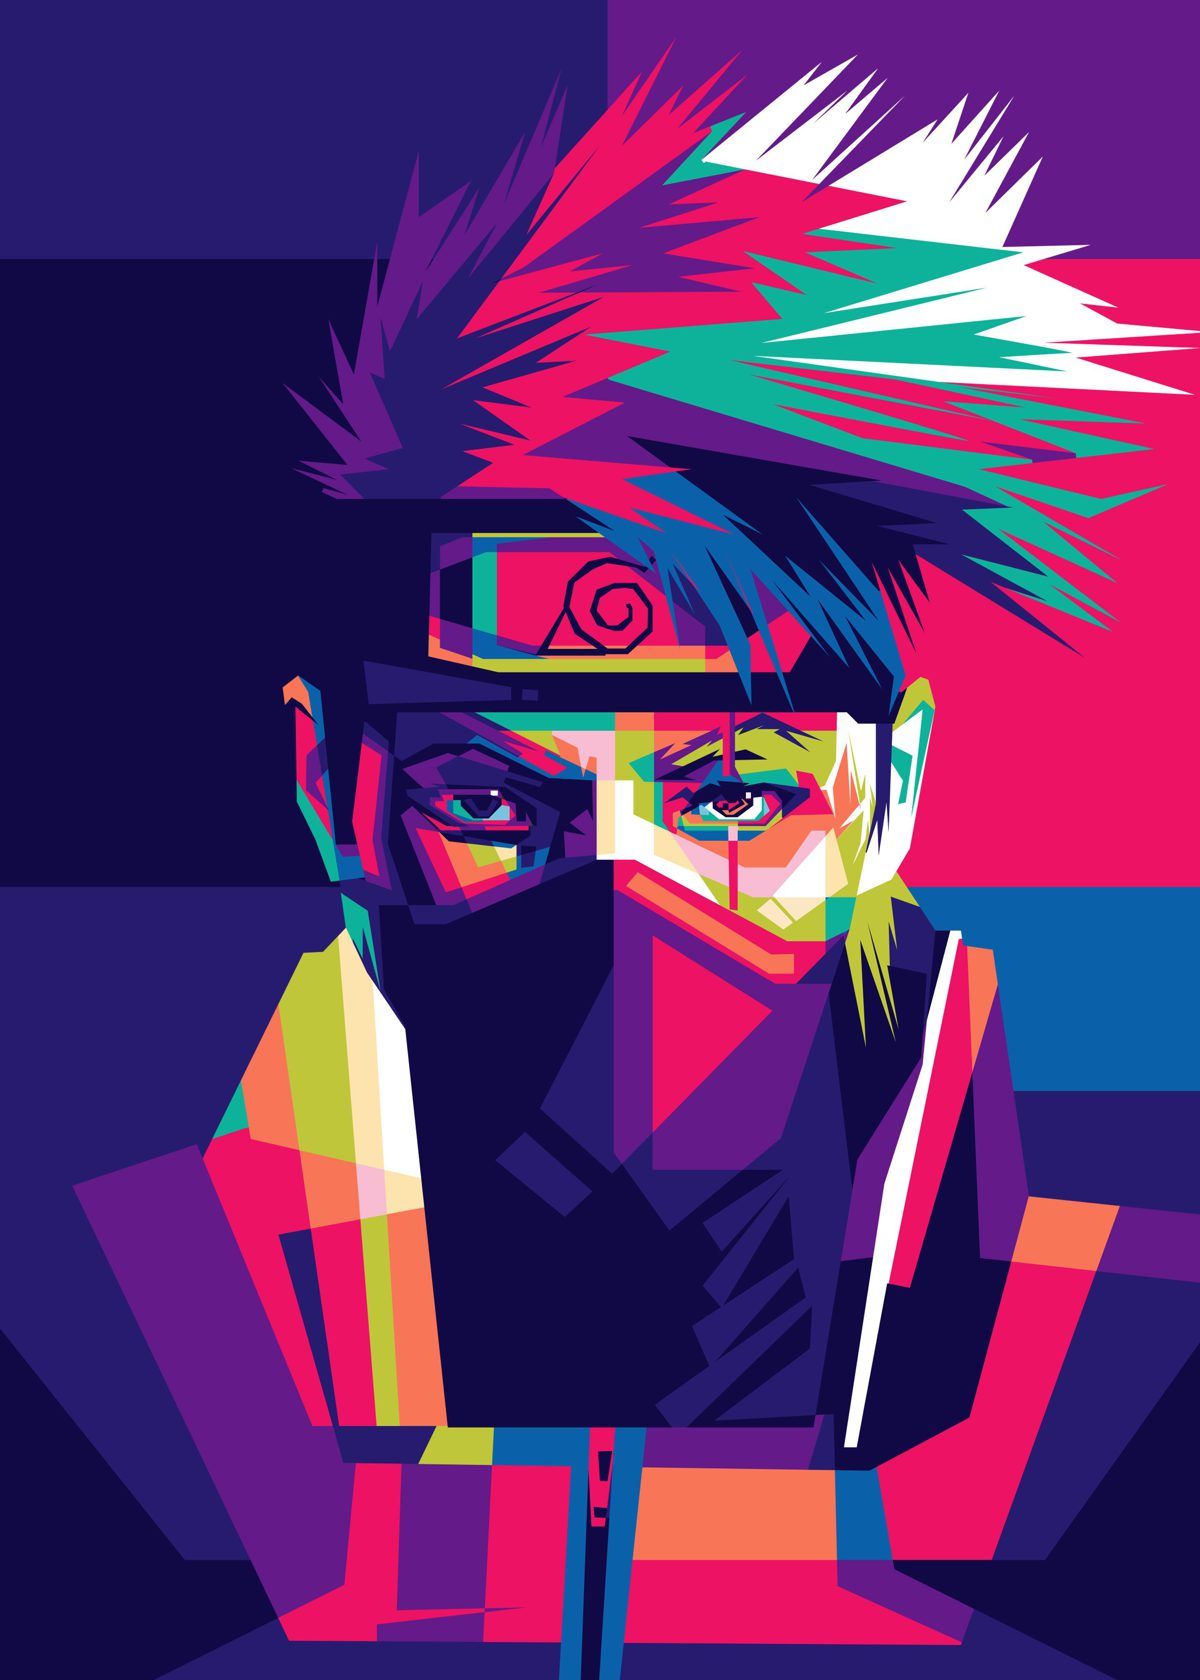 episodes later, Kakashi's face revealed in 'Naruto Shippuden'. Naruto painting, Best naruto wallpaper, Pop art posters